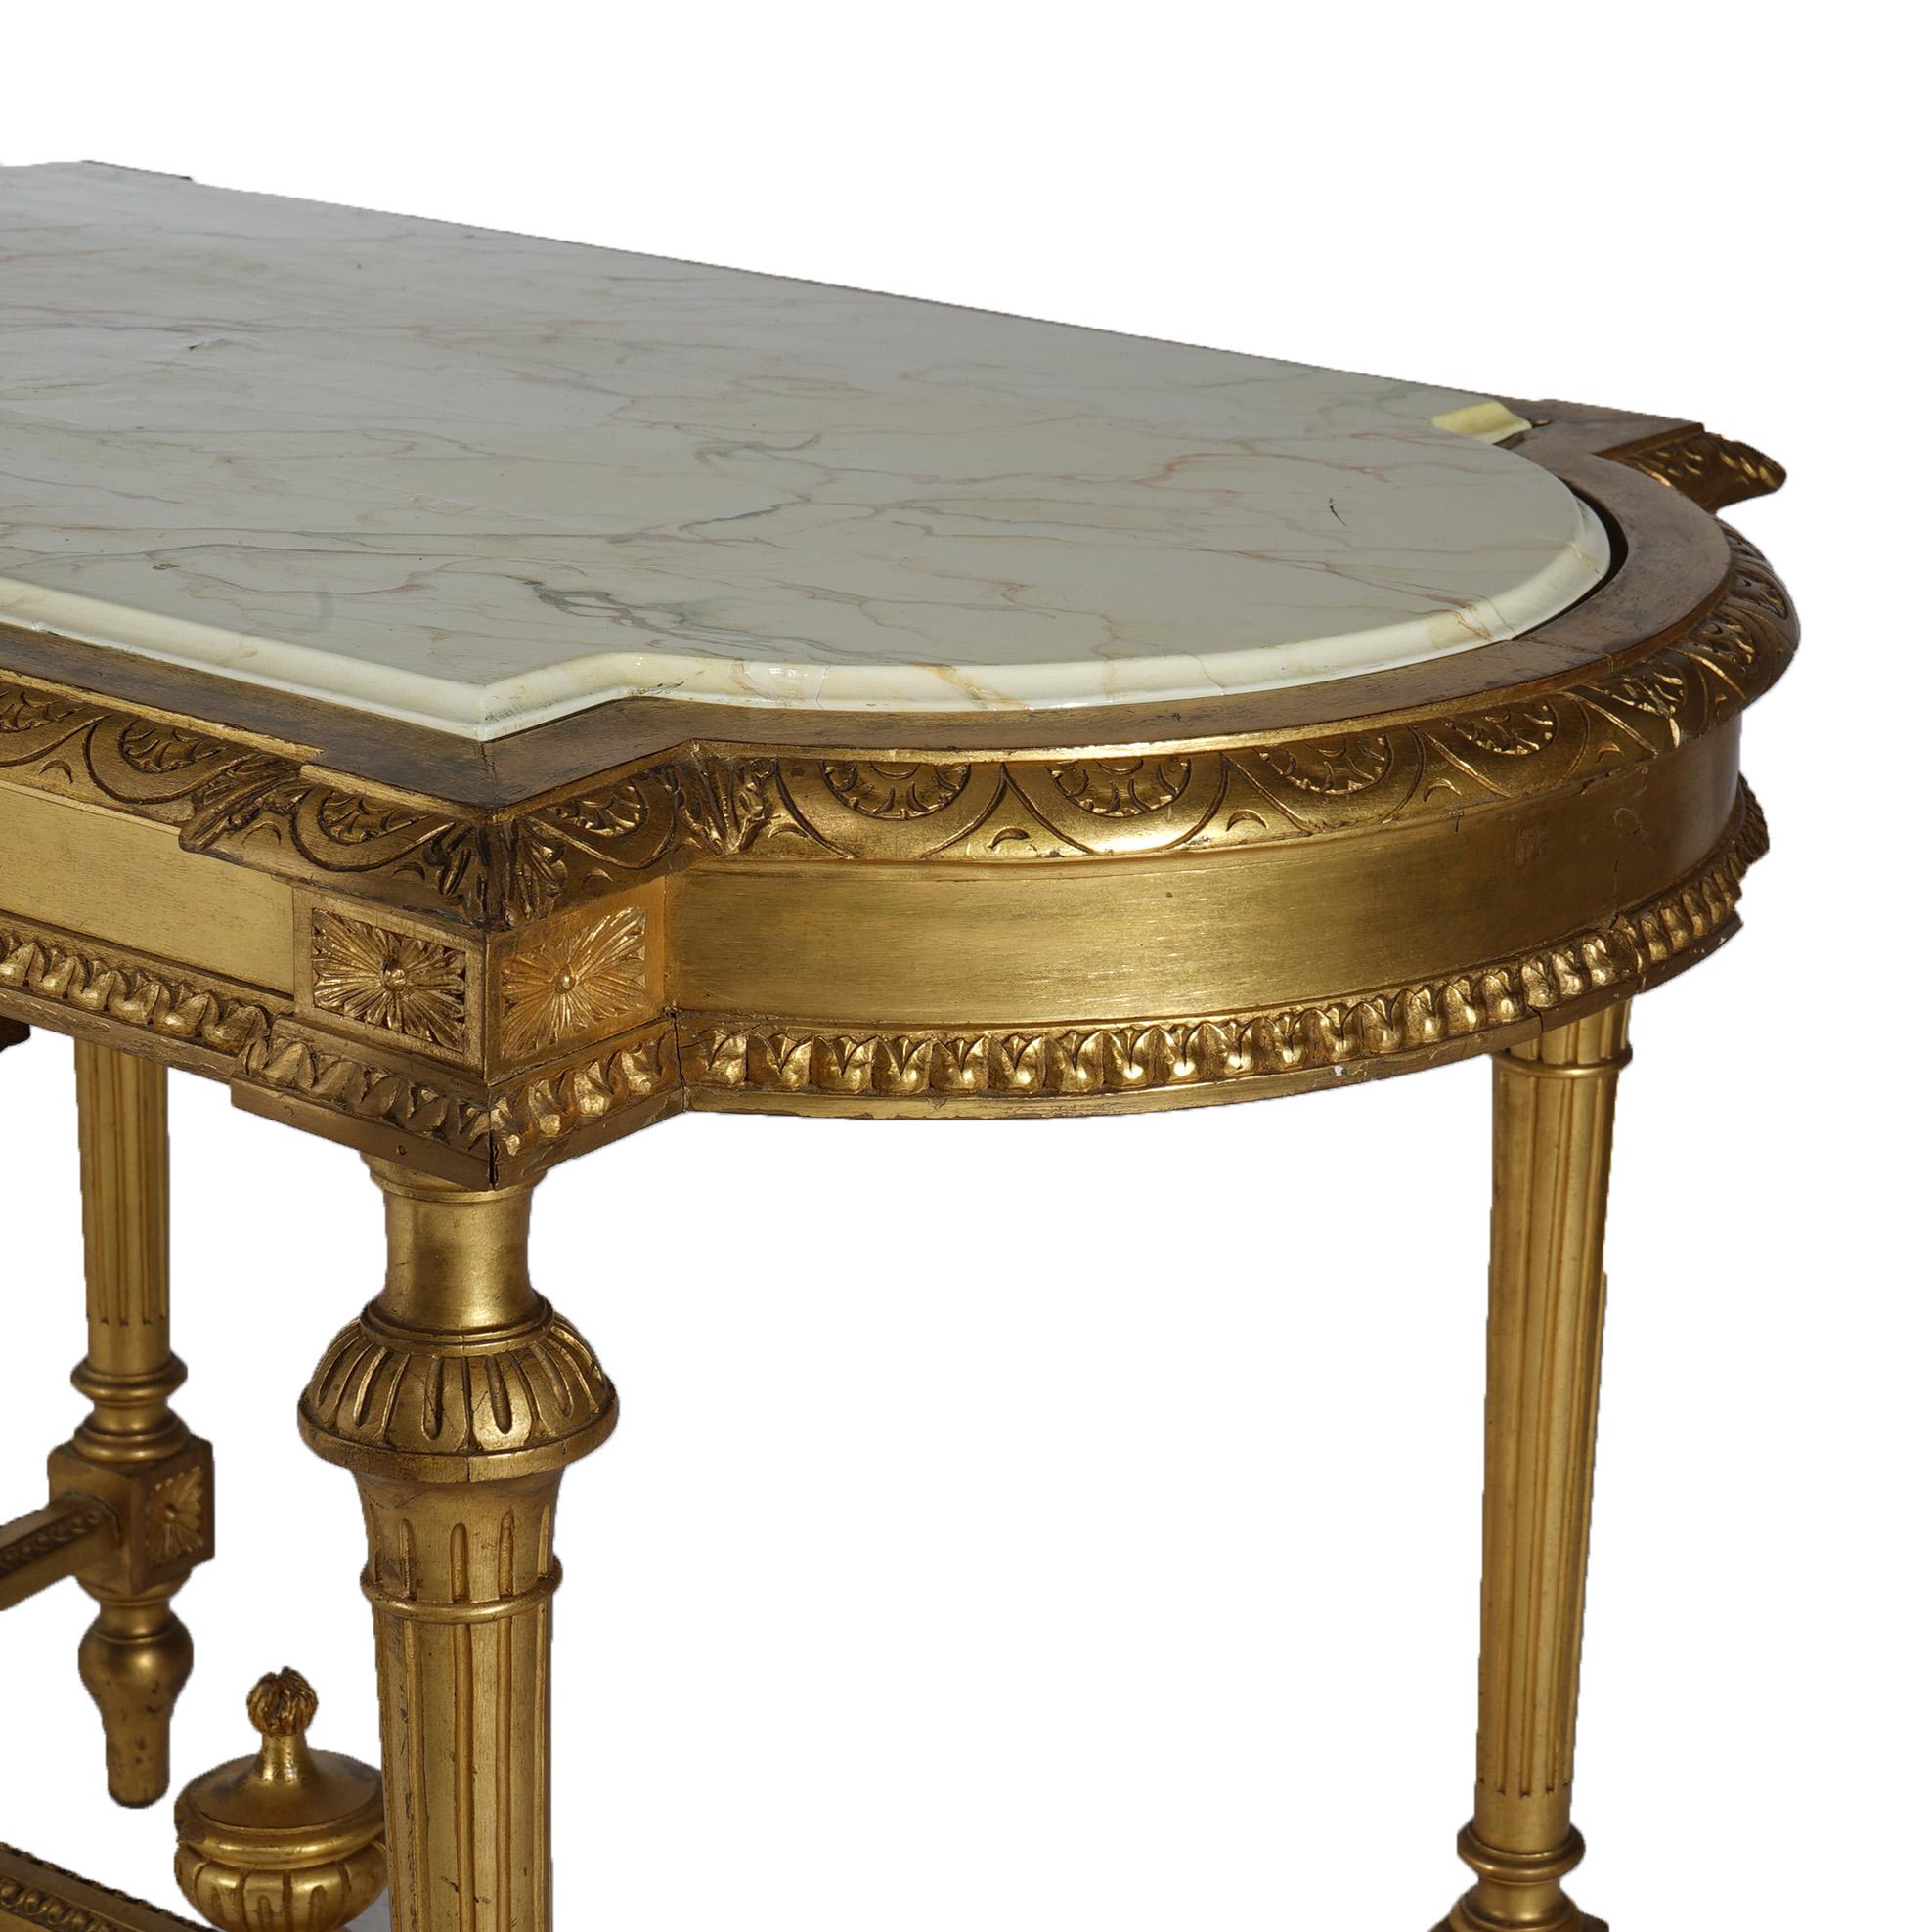 Antique French Louis XVI Style Giltwood Parlor Table with Faux Painted Top 19thC 4